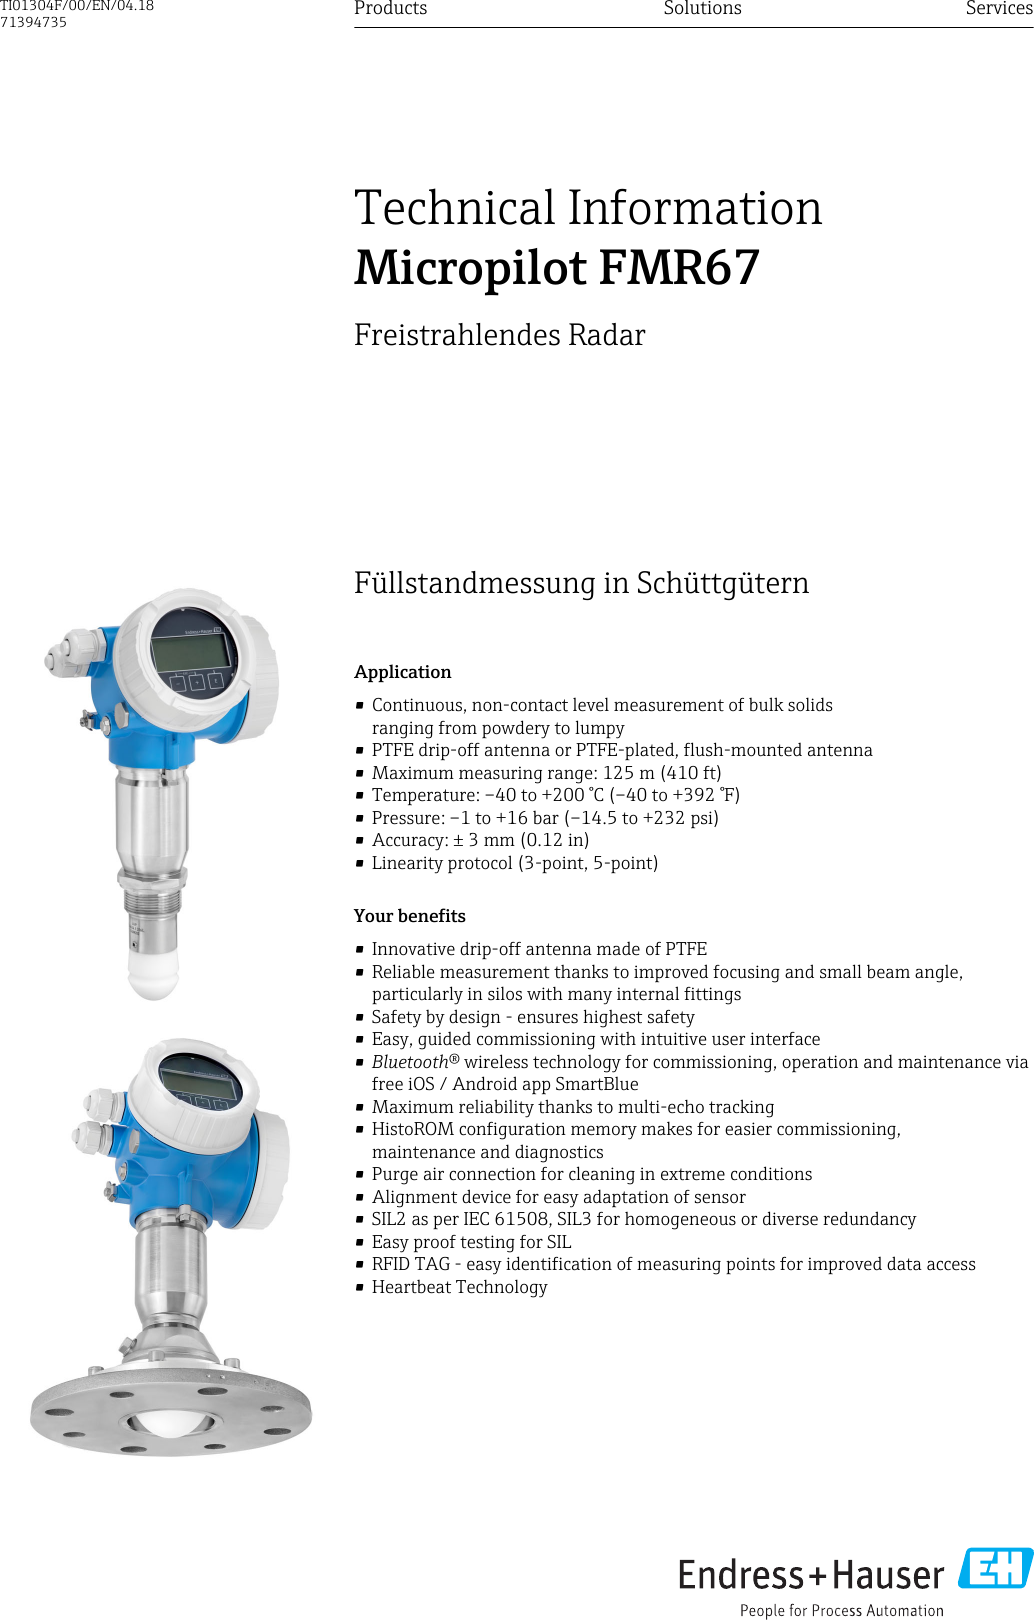 DRAFT DRAFT   DRAFT   DRAFT   DRAFT   DRAFT   DRAFTDRAFT   DRAFT   DRAFTFüllstandmessung in SchüttgüternApplication• Continuous, non-contact level measurement of bulk solidsranging from powdery to lumpy• PTFE drip-off antenna or PTFE-plated, flush-mounted antenna• Maximum measuring range: 125 m (410 ft)• Temperature: –40 to +200 °C (–40 to +392 °F)• Pressure: –1 to +16 bar (–14.5 to +232 psi)• Accuracy: ± 3 mm (0.12 in)• Linearity protocol (3-point, 5-point)Your benefits• Innovative drip-off antenna made of PTFE• Reliable measurement thanks to improved focusing and small beam angle,particularly in silos with many internal fittings• Safety by design - ensures highest safety• Easy, guided commissioning with intuitive user interface•Bluetooth® wireless technology for commissioning, operation and maintenance viafree iOS / Android app SmartBlue• Maximum reliability thanks to multi-echo tracking• HistoROM configuration memory makes for easier commissioning,maintenance and diagnostics• Purge air connection for cleaning in extreme conditions• Alignment device for easy adaptation of sensor• SIL2 as per IEC 61508, SIL3 for homogeneous or diverse redundancy• Easy proof testing for SIL• RFID TAG - easy identification of measuring points for improved data access• Heartbeat TechnologyProducts Solutions ServicesTechnical InformationMicropilot FMR67Freistrahlendes RadarTI01304F/00/EN/04.1871394735